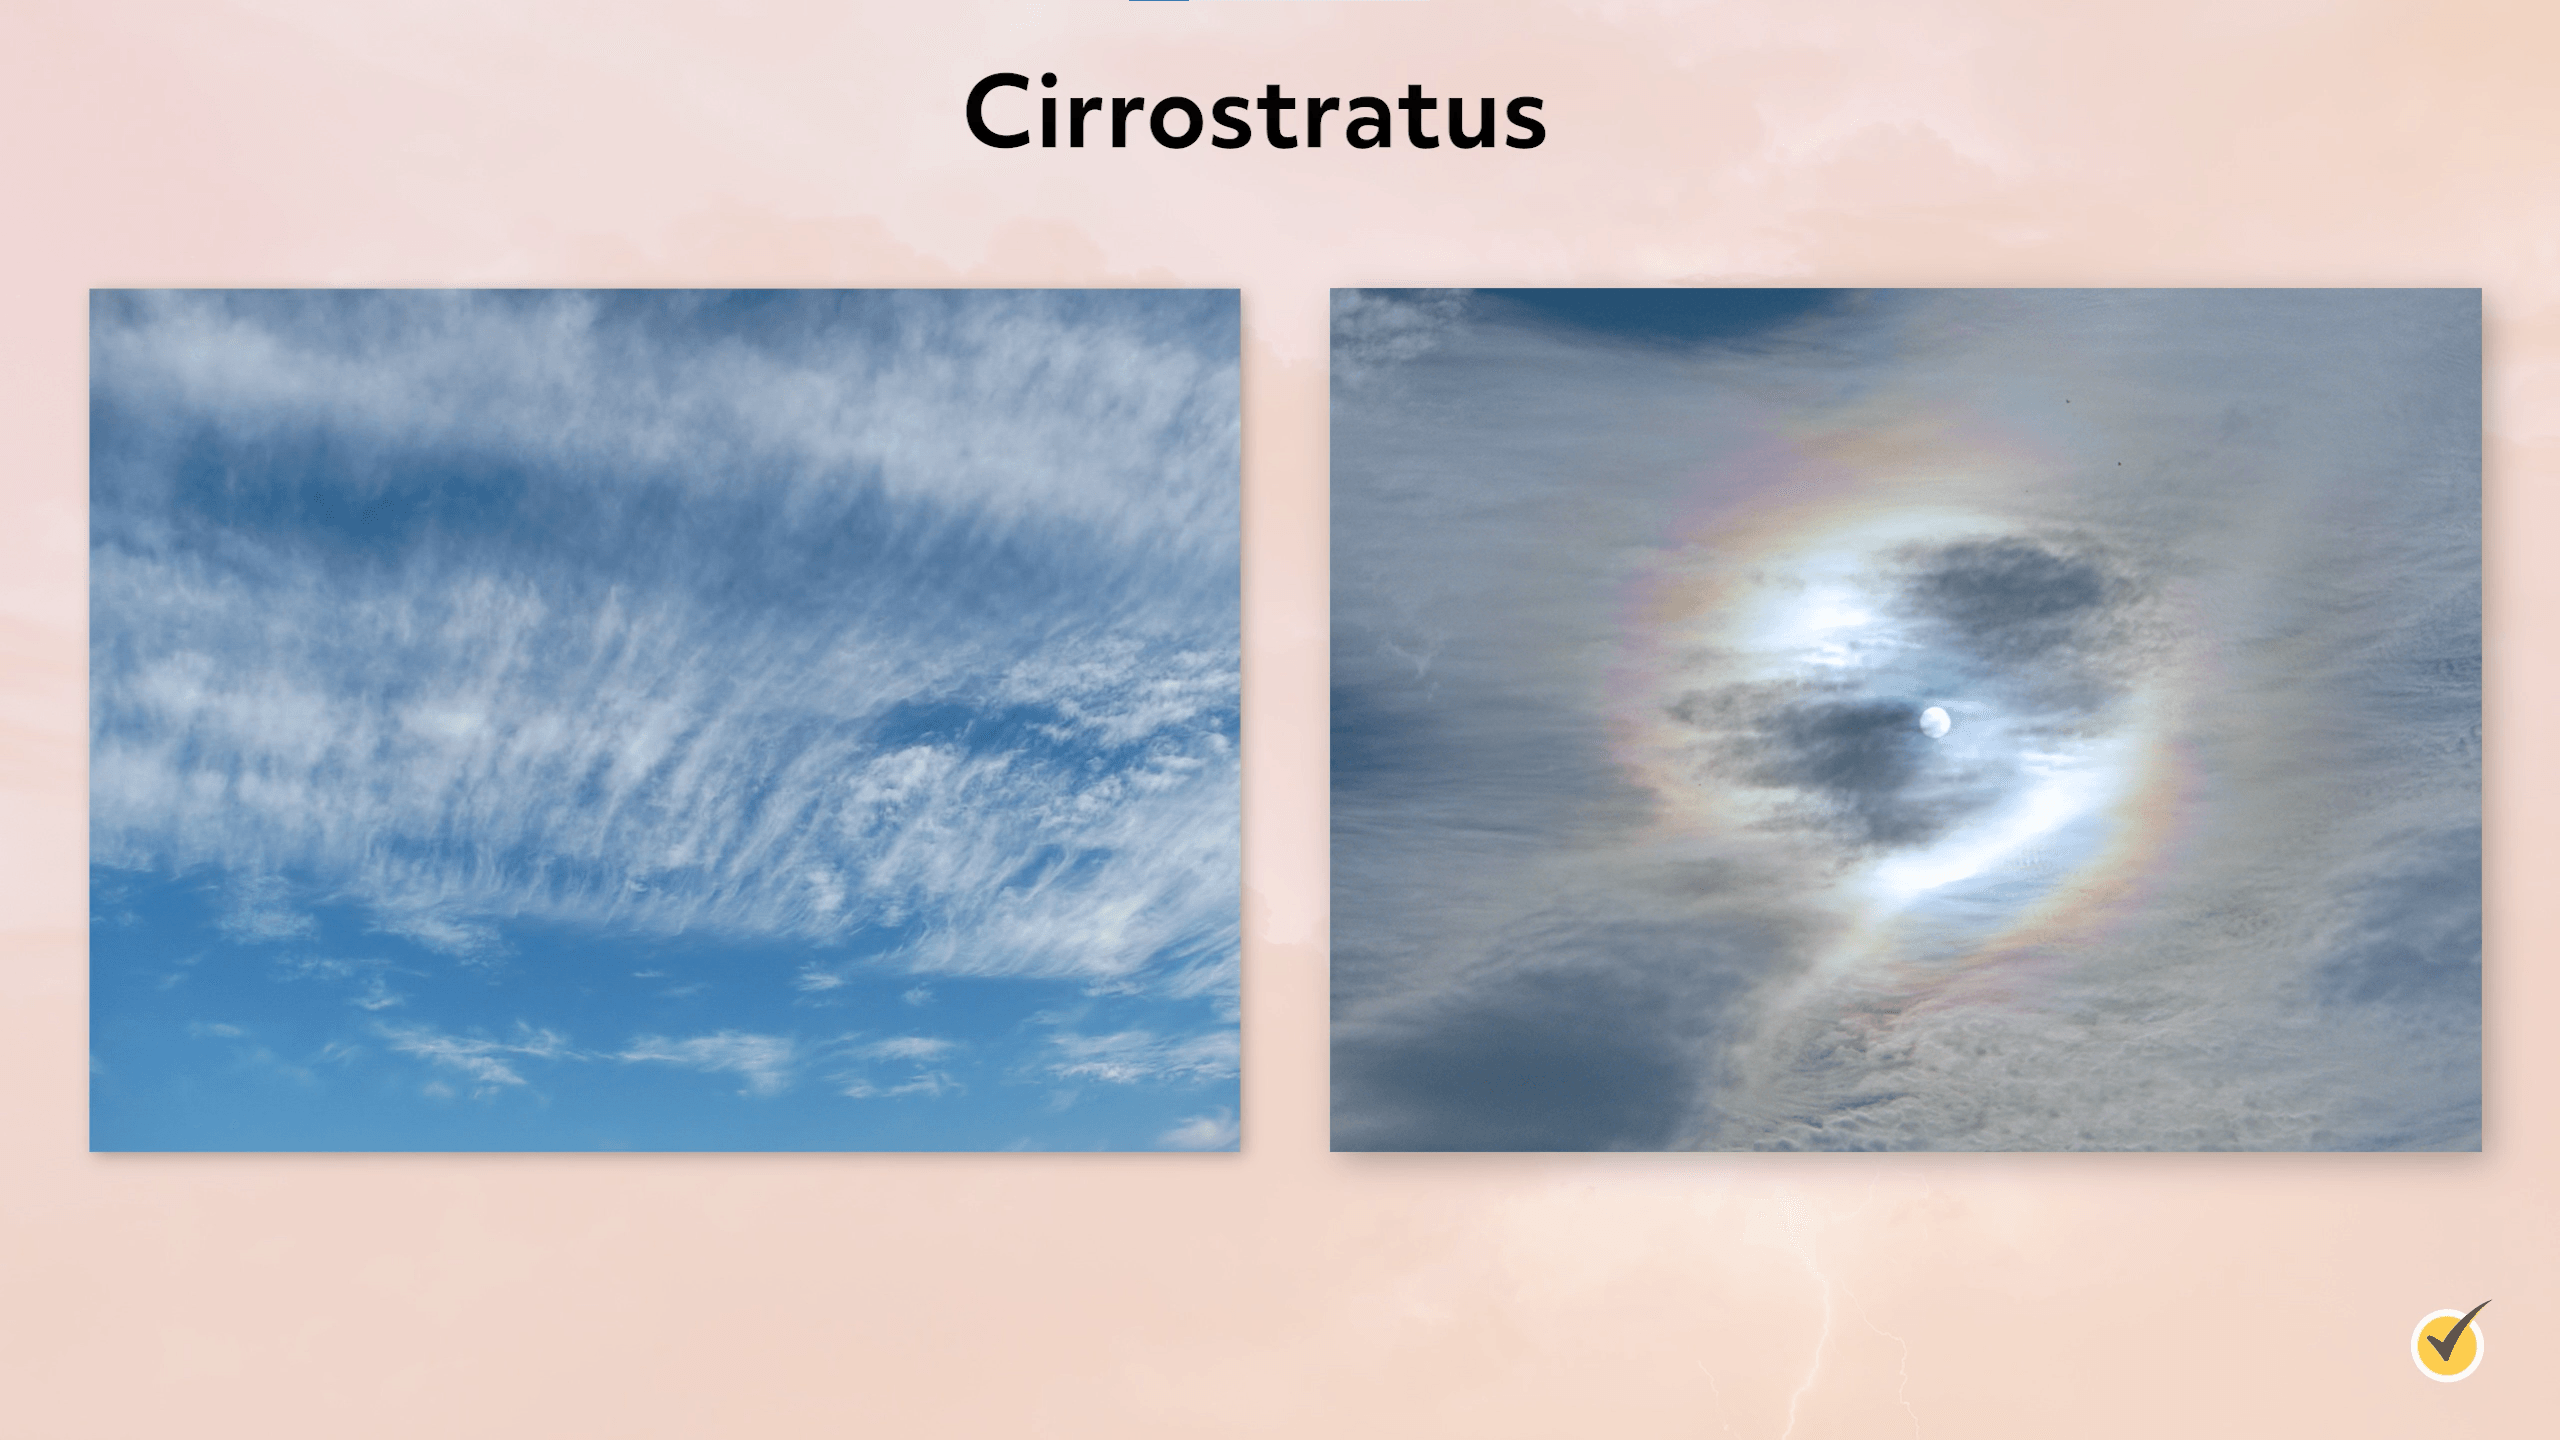 Image of cirrostratus, there is a shimmery ring around the sun.